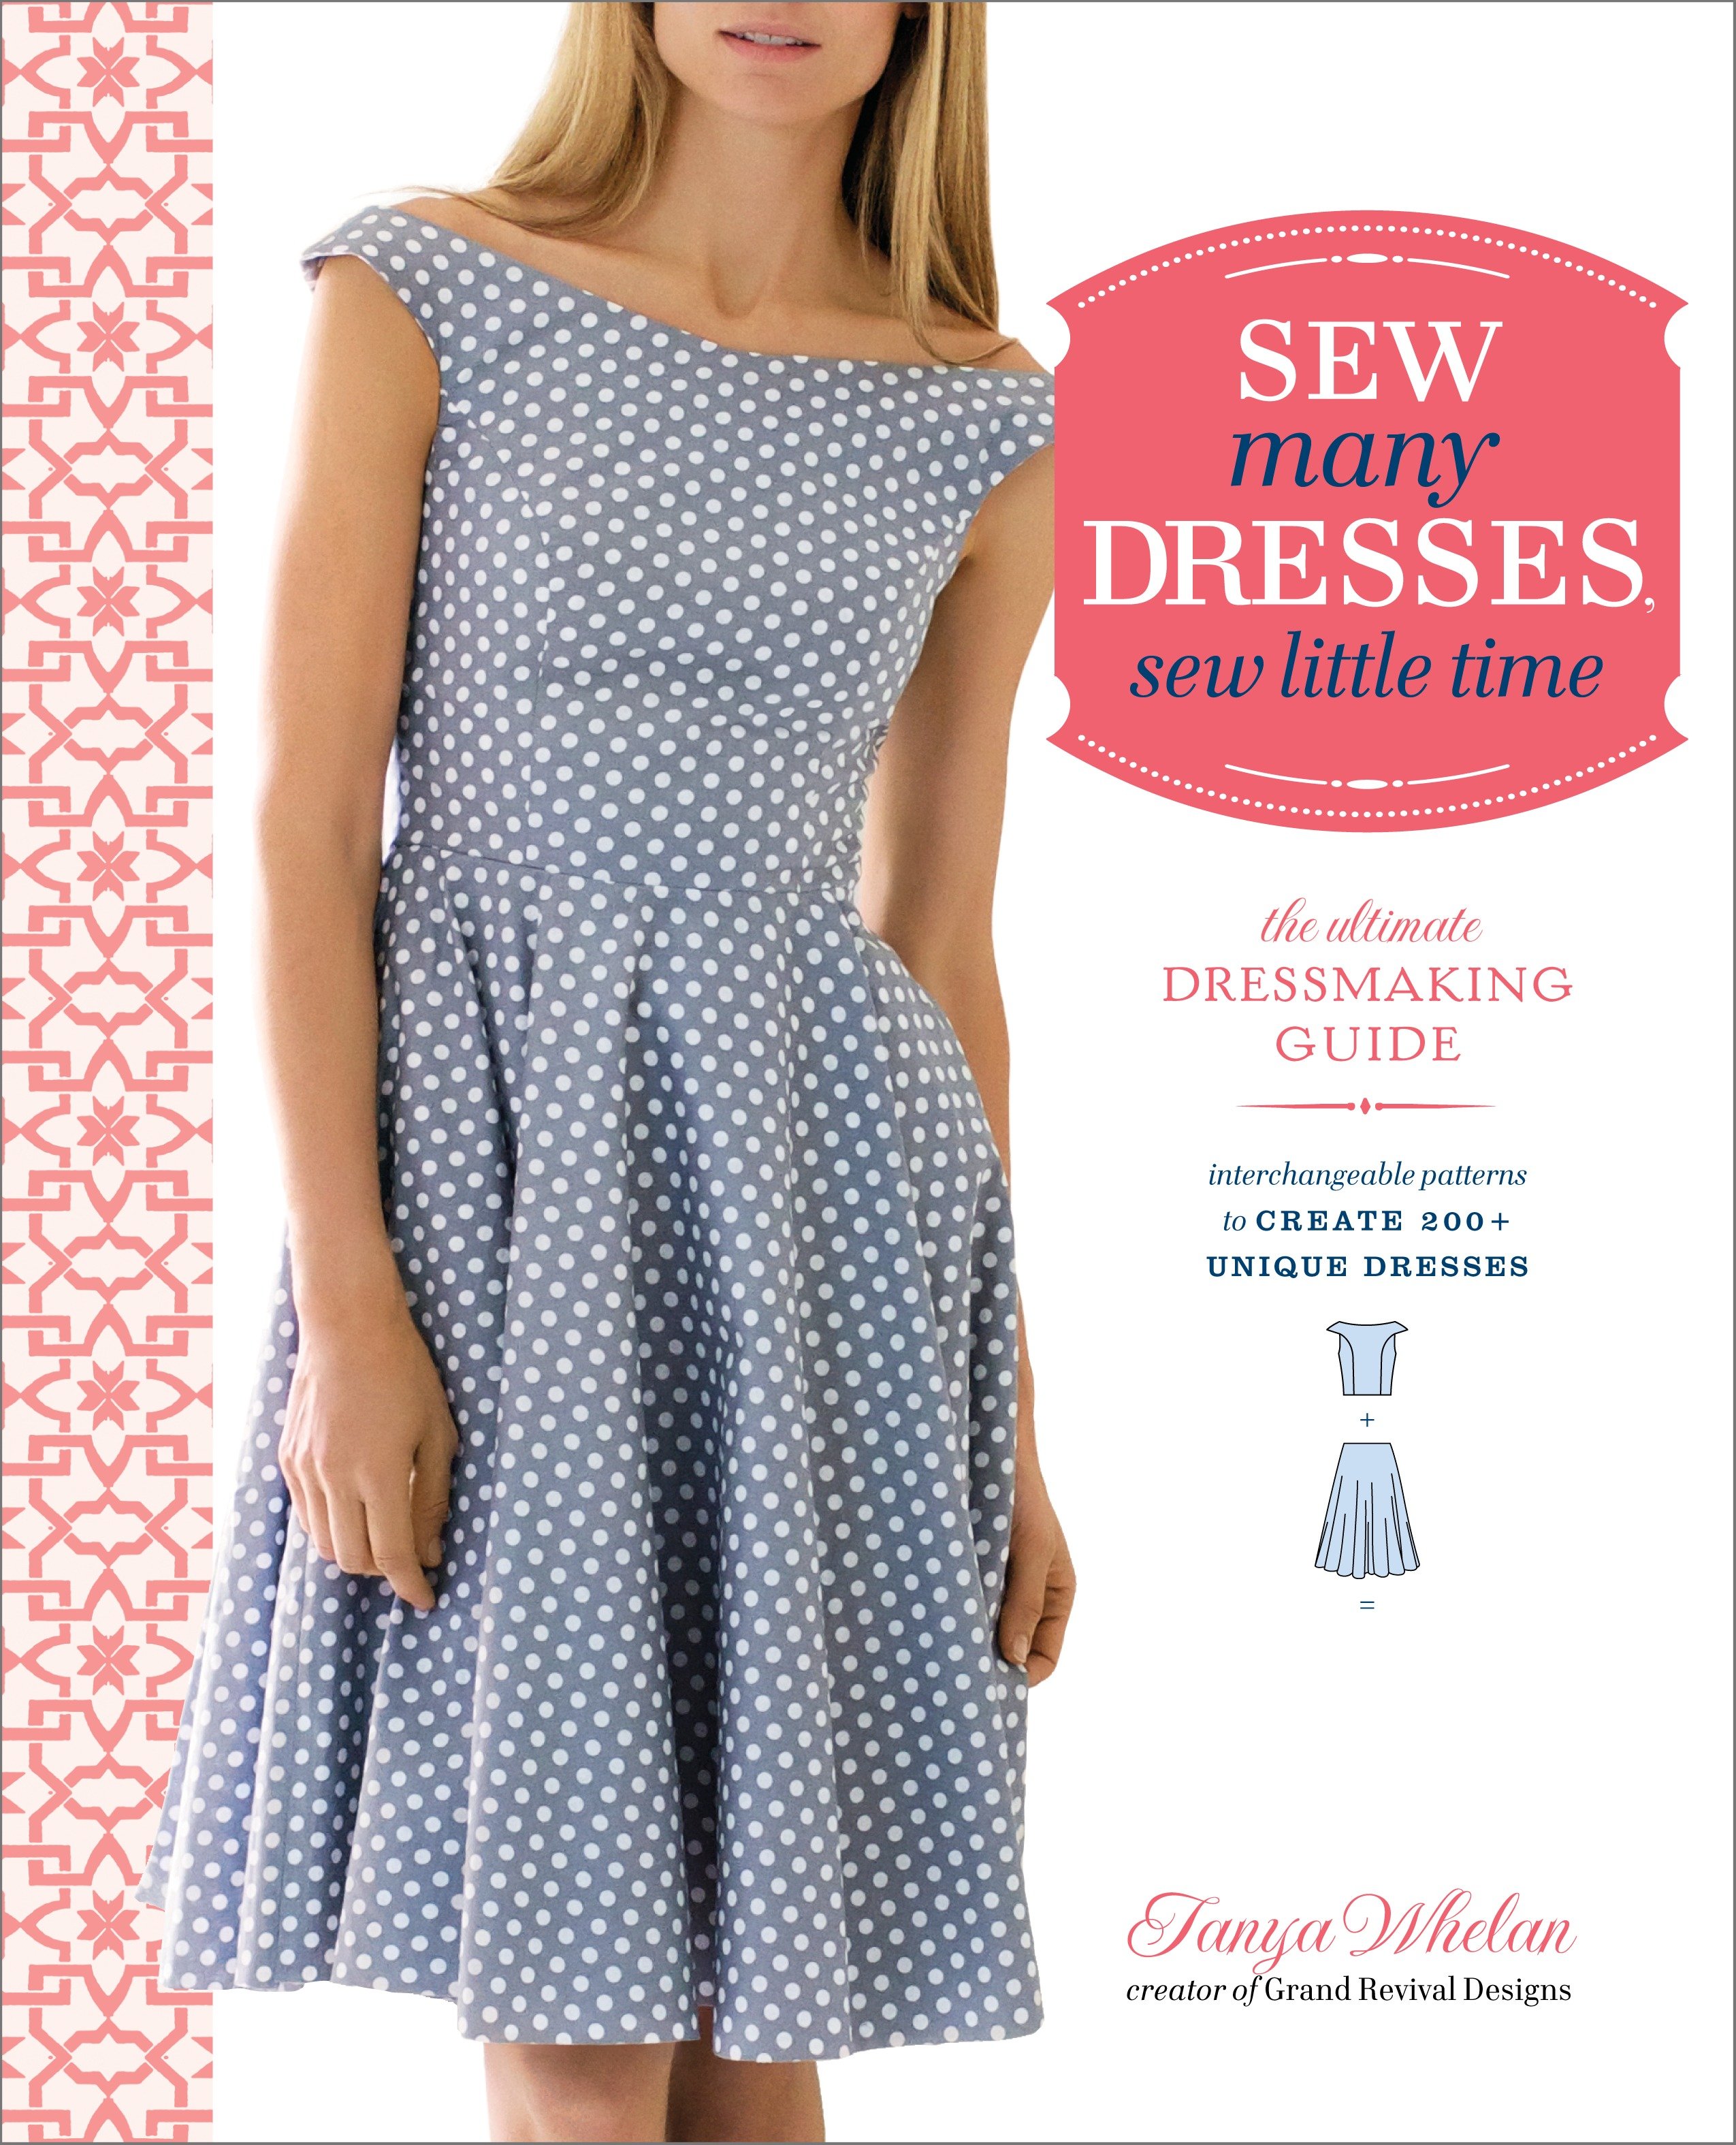 Sew many dresses, sew little time the ultimate dressmaking guide cover image